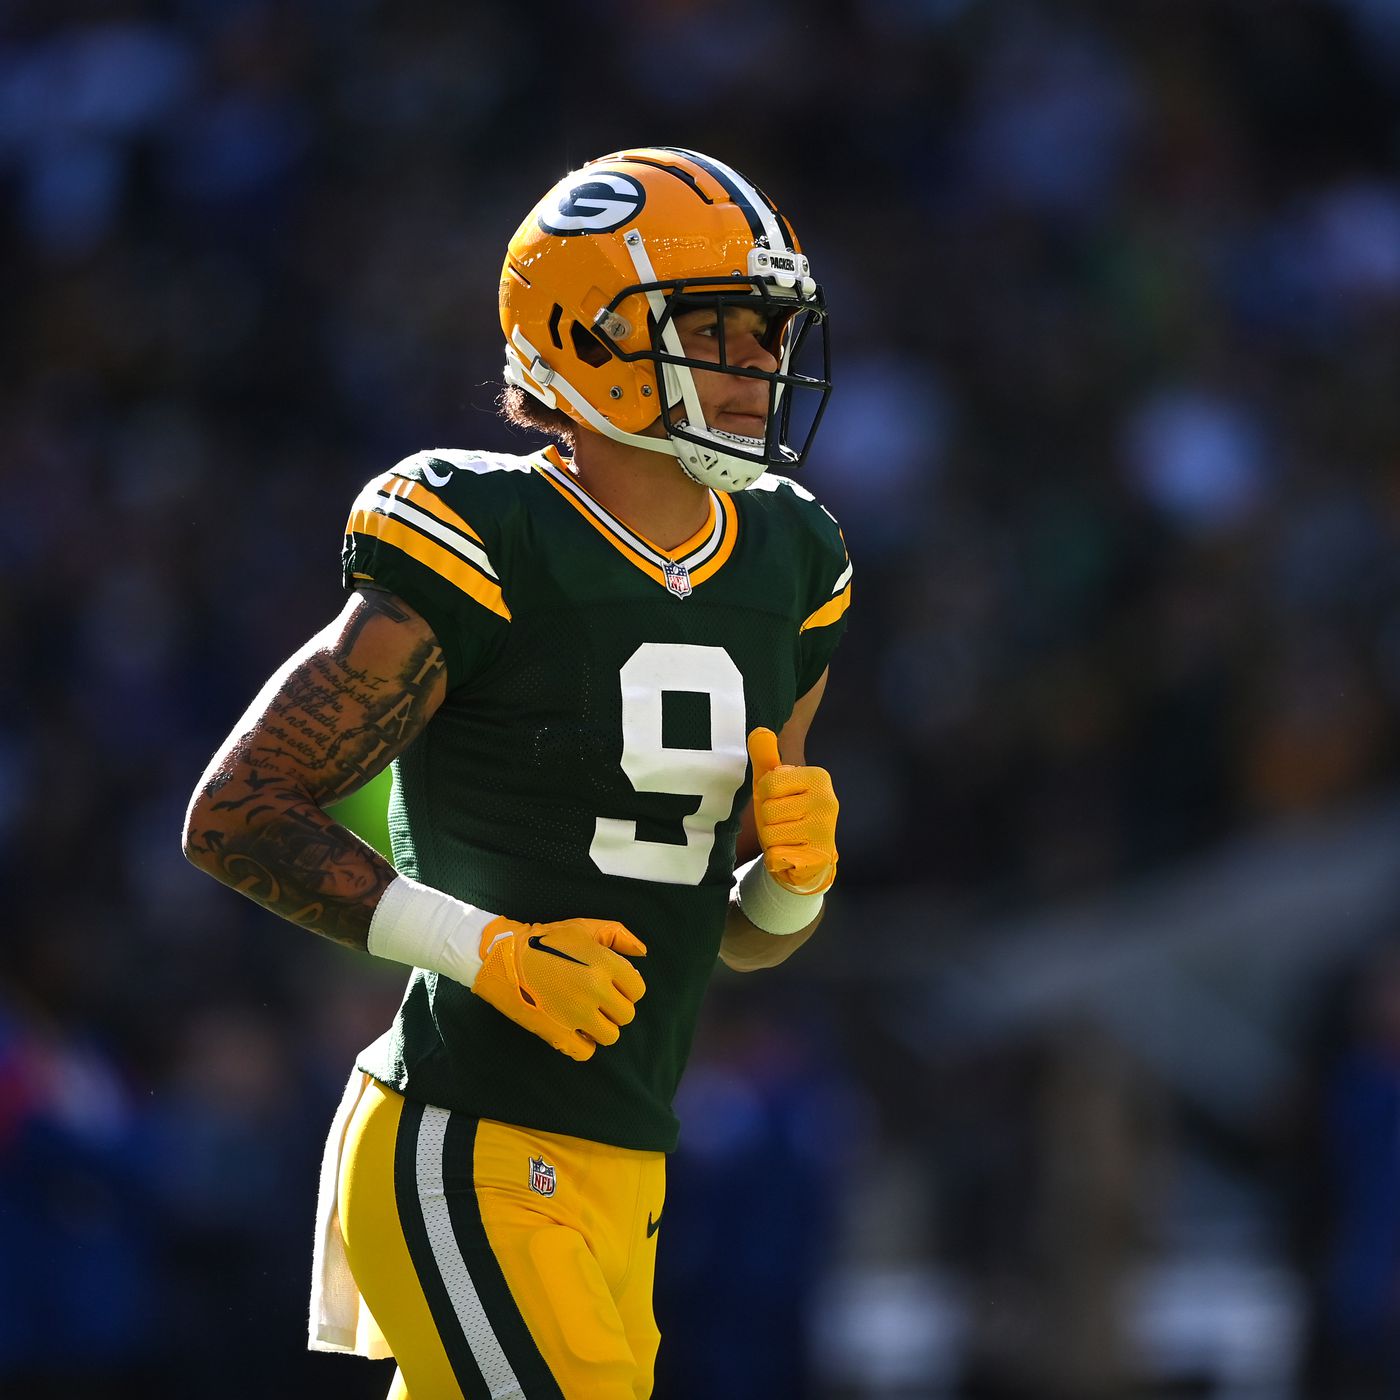 Best photos of Christian Watsons rookie season with Packers